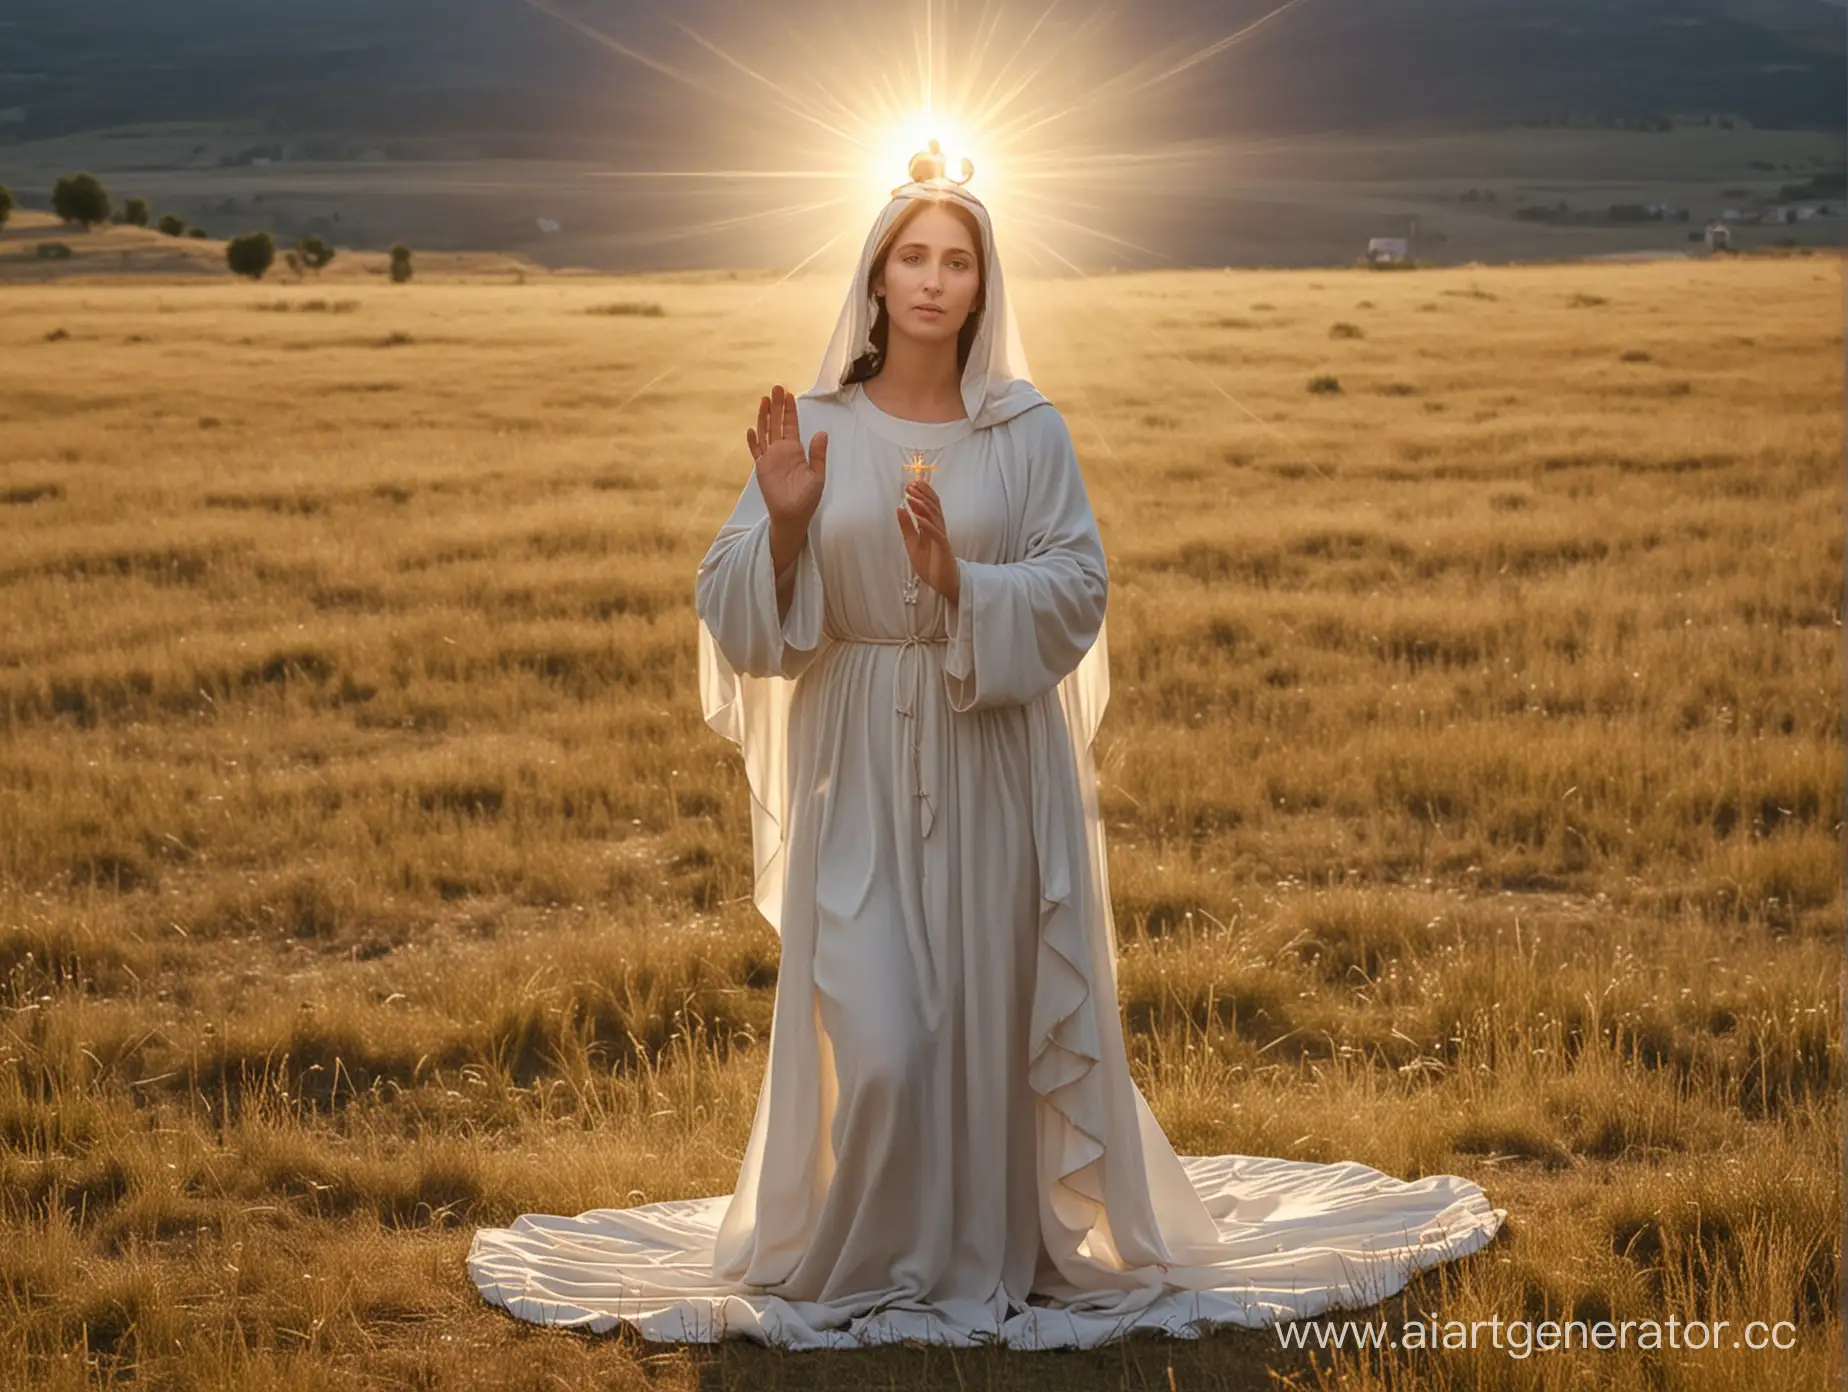 Virgin-Mary-Apparition-in-Field-with-Illuminated-Guidance